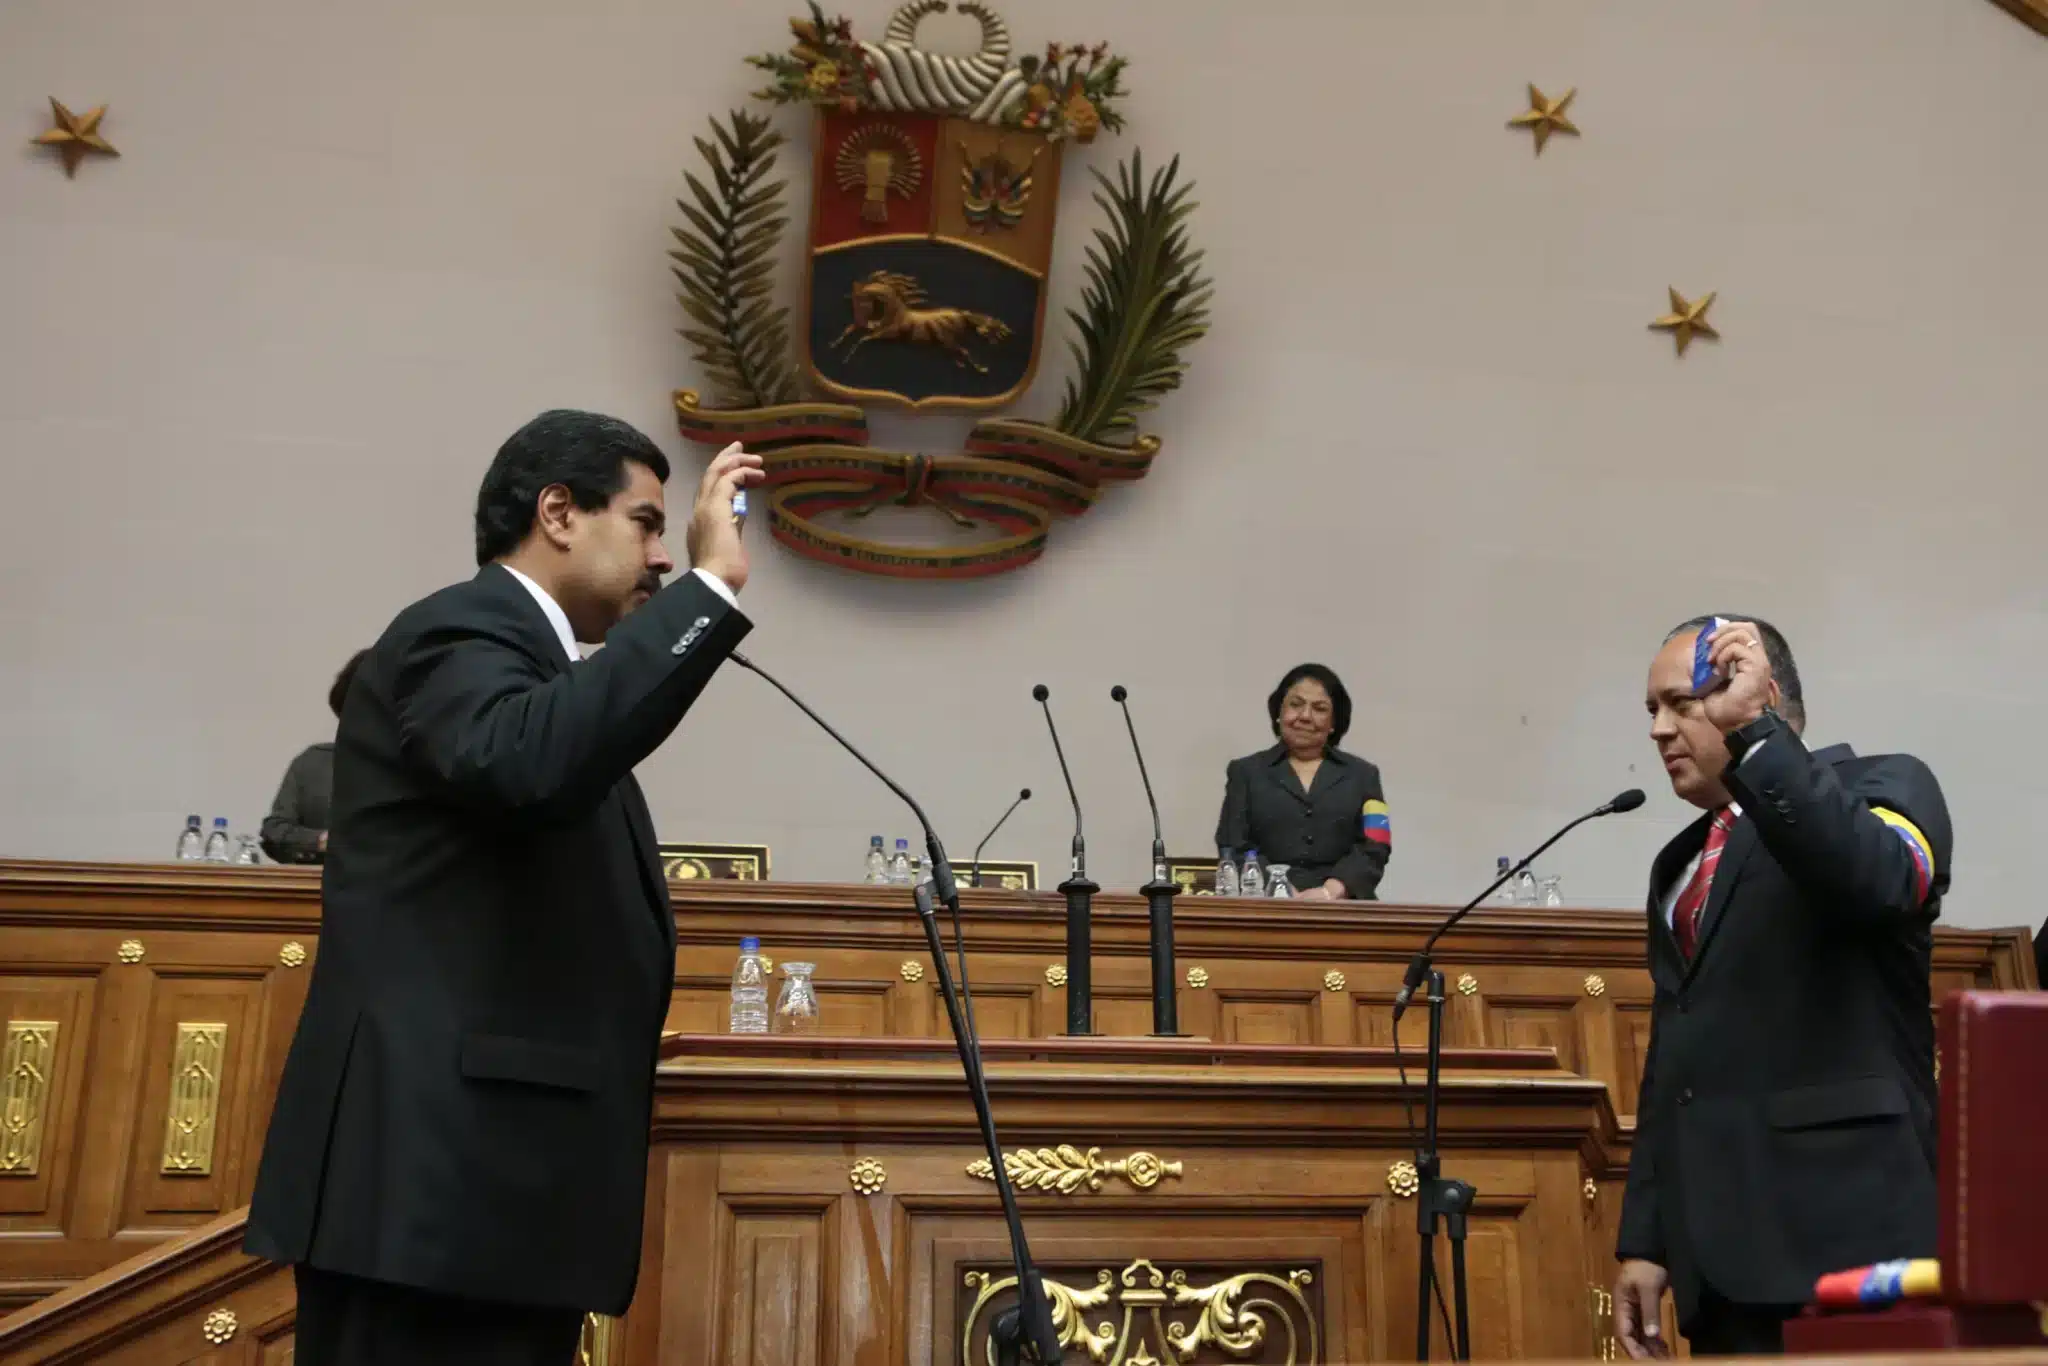 Nicolás Maduro (left) being sworn in as the interim president of Venezuela by then National Assembly President Diosdado Cabello, on March 9, 2013, after the passing of Hugo Chávez. Photo: AVN.